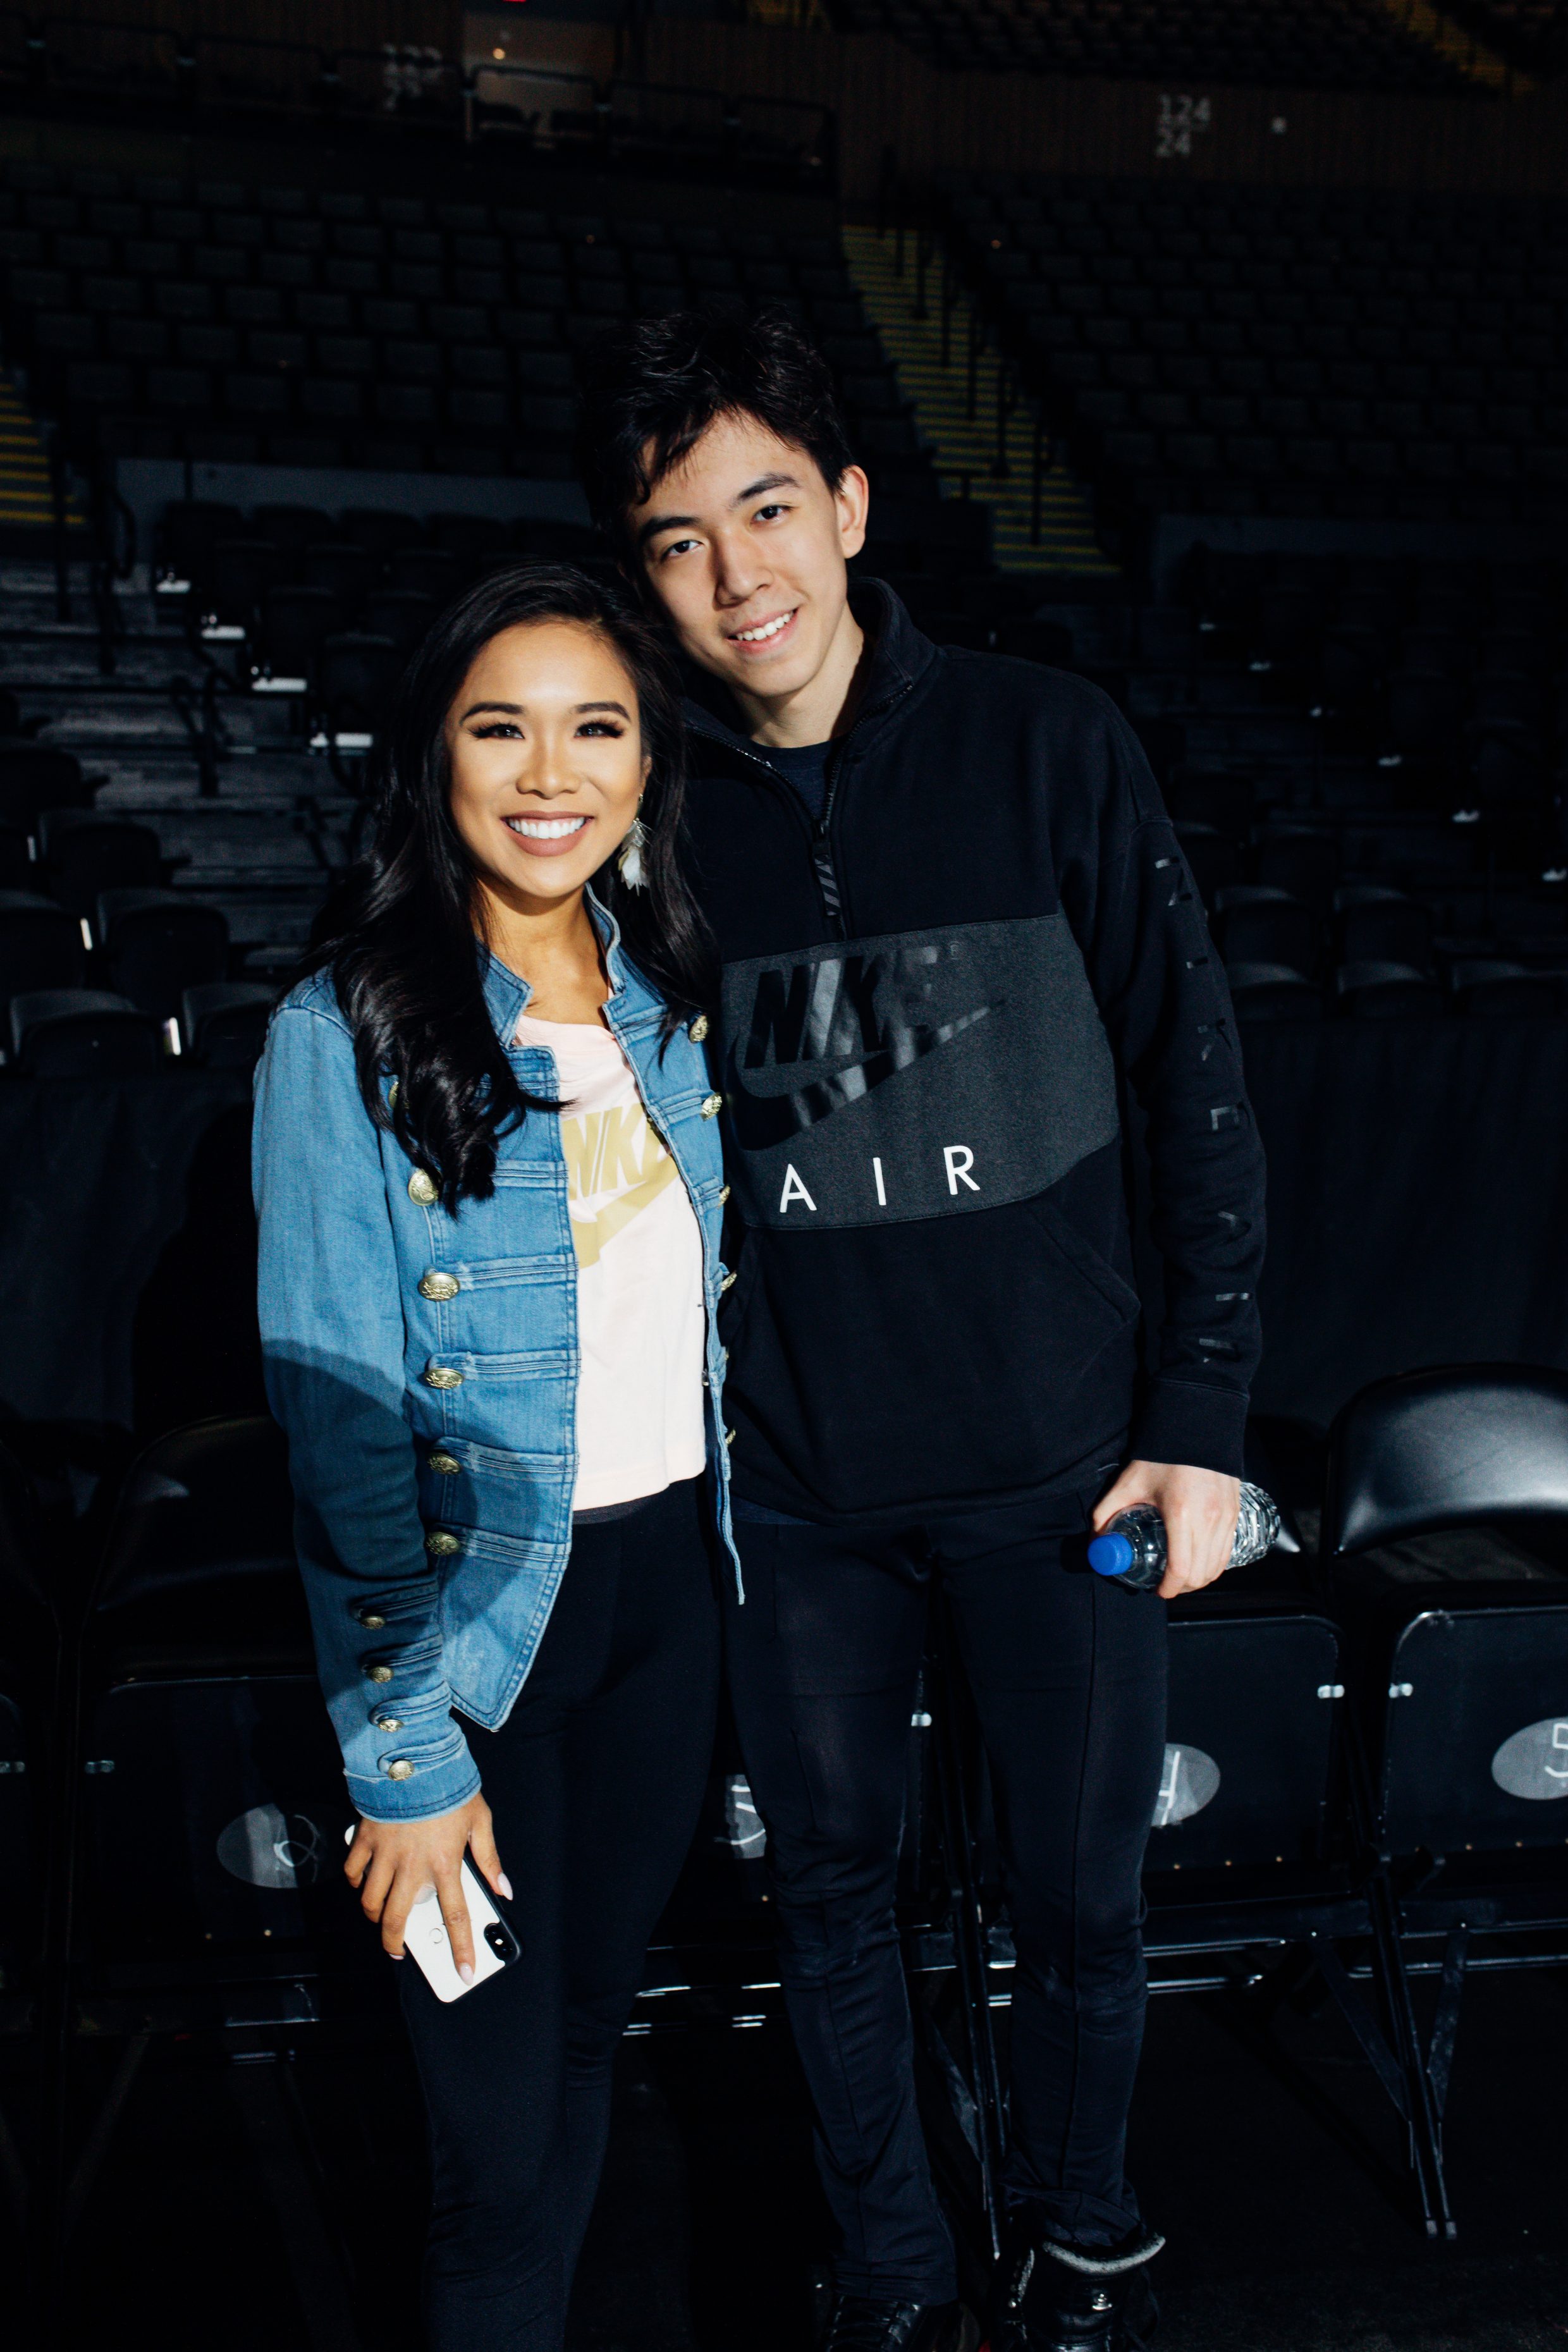 Hoang-Kim Cung and Vincent Zhou at Stars on Ice in Long Island